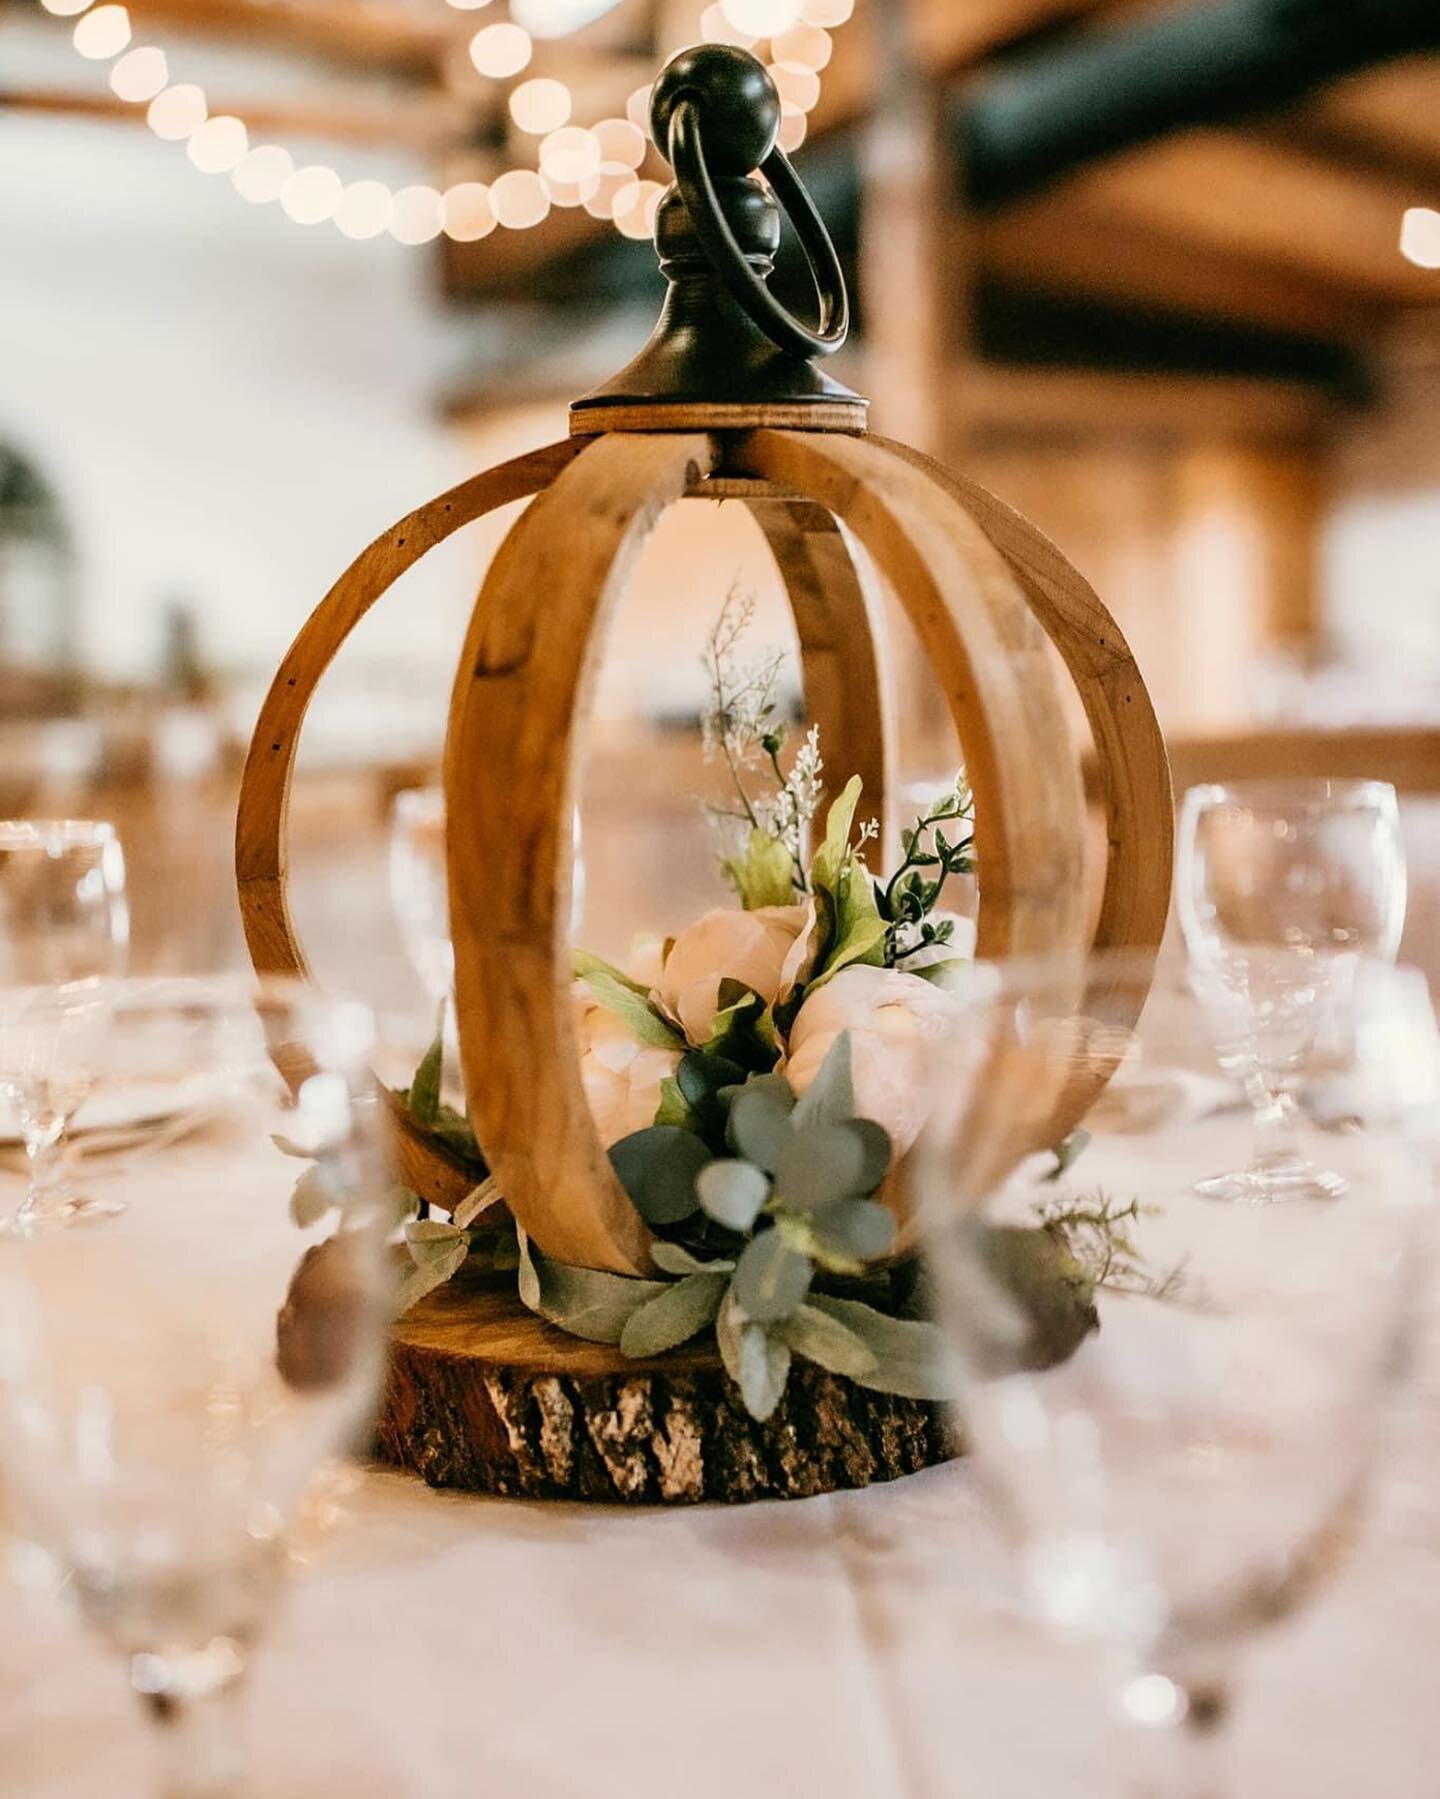 Attention to detail is |everything|🌿
I had so much fun decorating and helping create Christina &amp; Neal&rsquo;s dream day. It couldn&rsquo;t have happened without all the incredible vendors. I would never try to take all the credit. From Christina